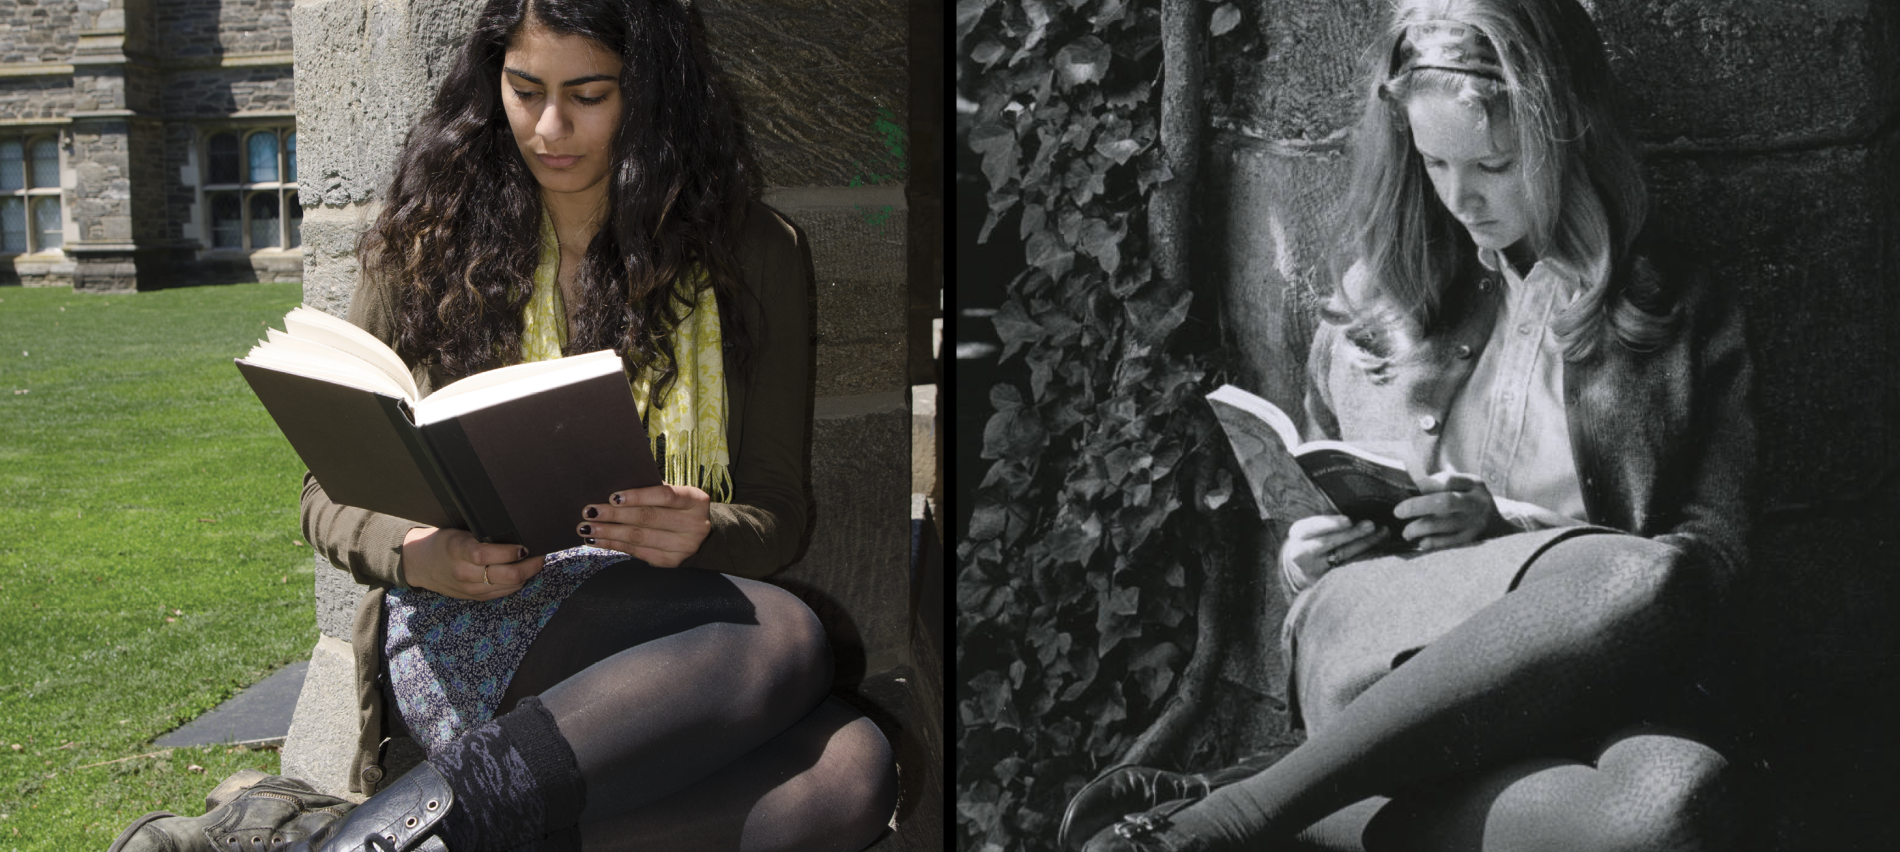 Then and Now - Studying in the Cloisters